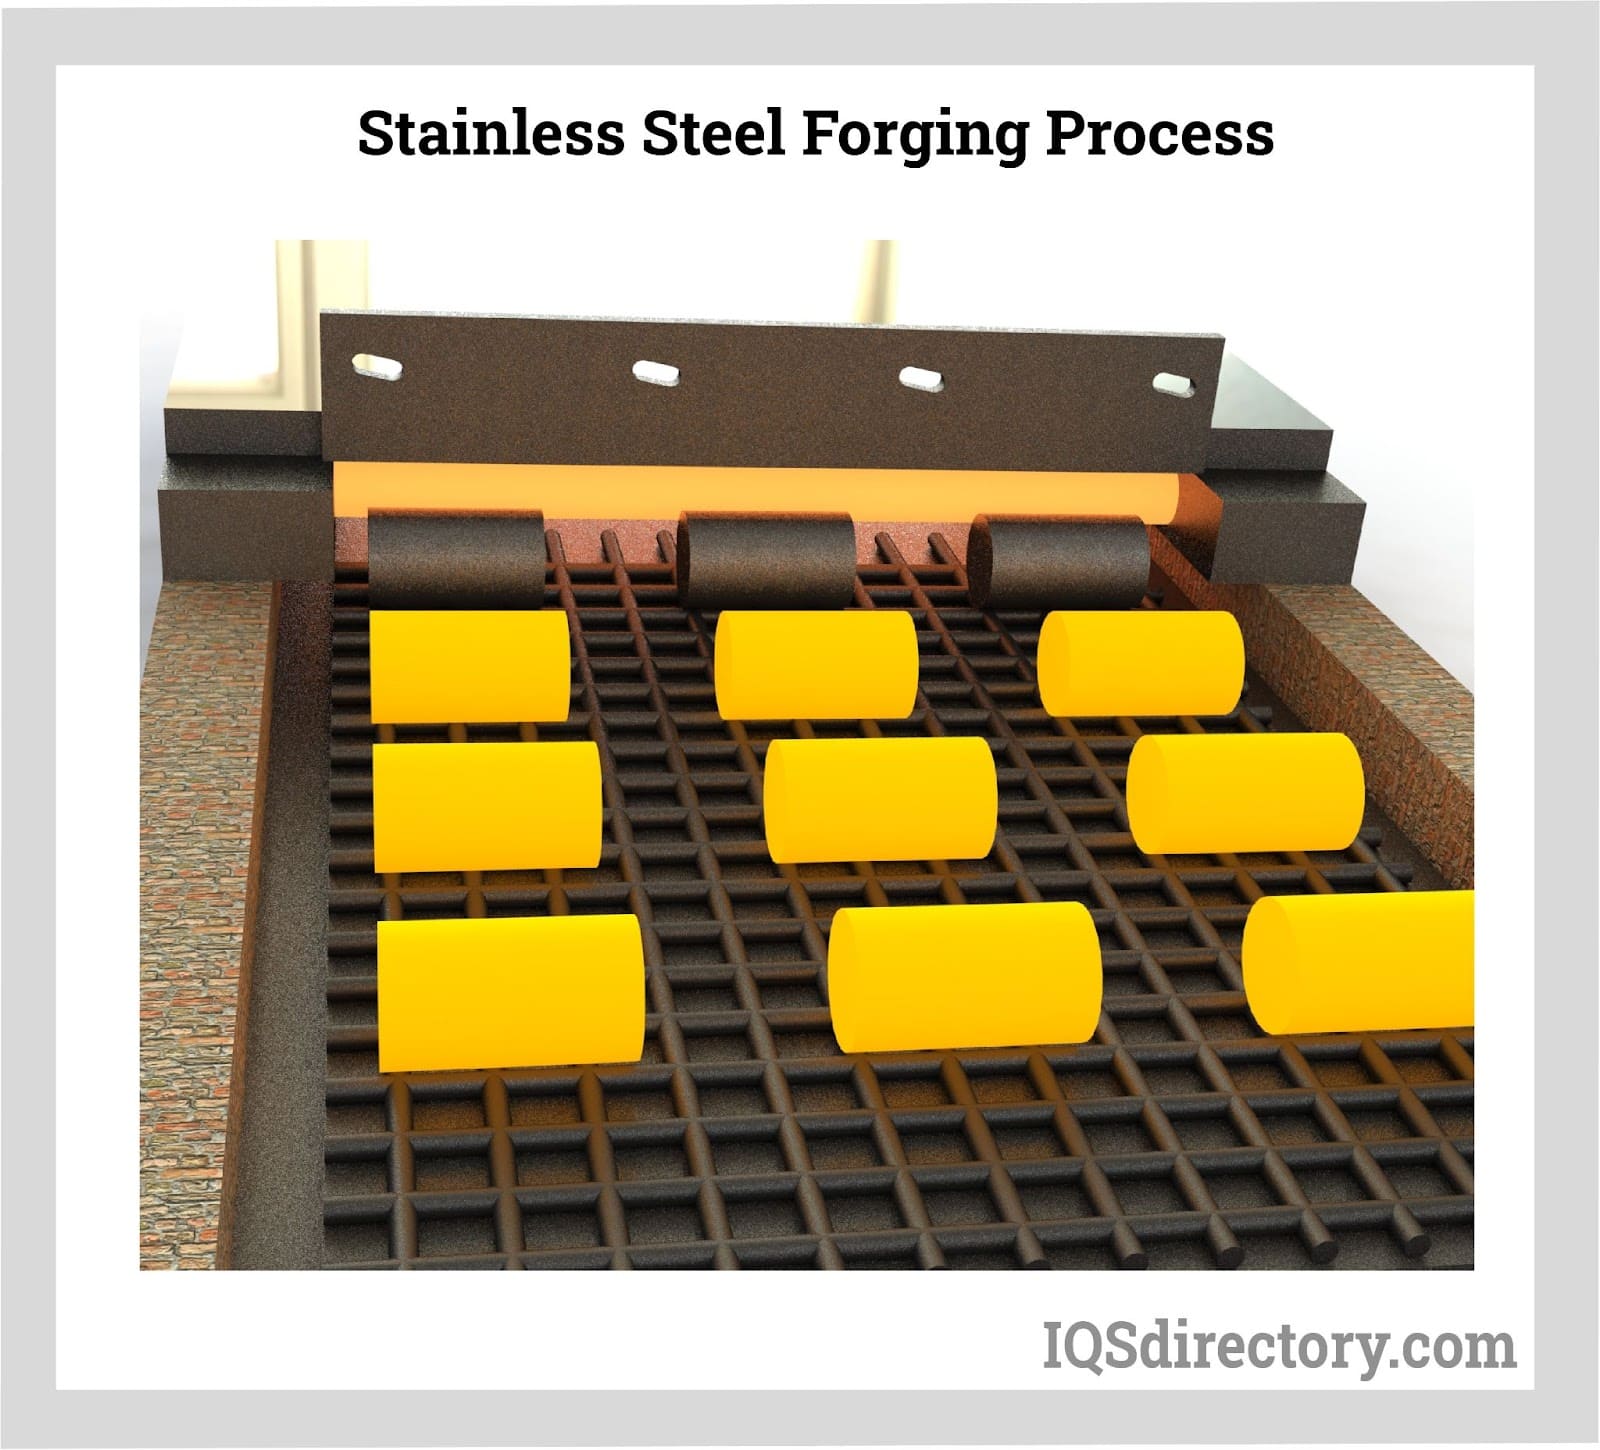 Stainless Steel Forging Process